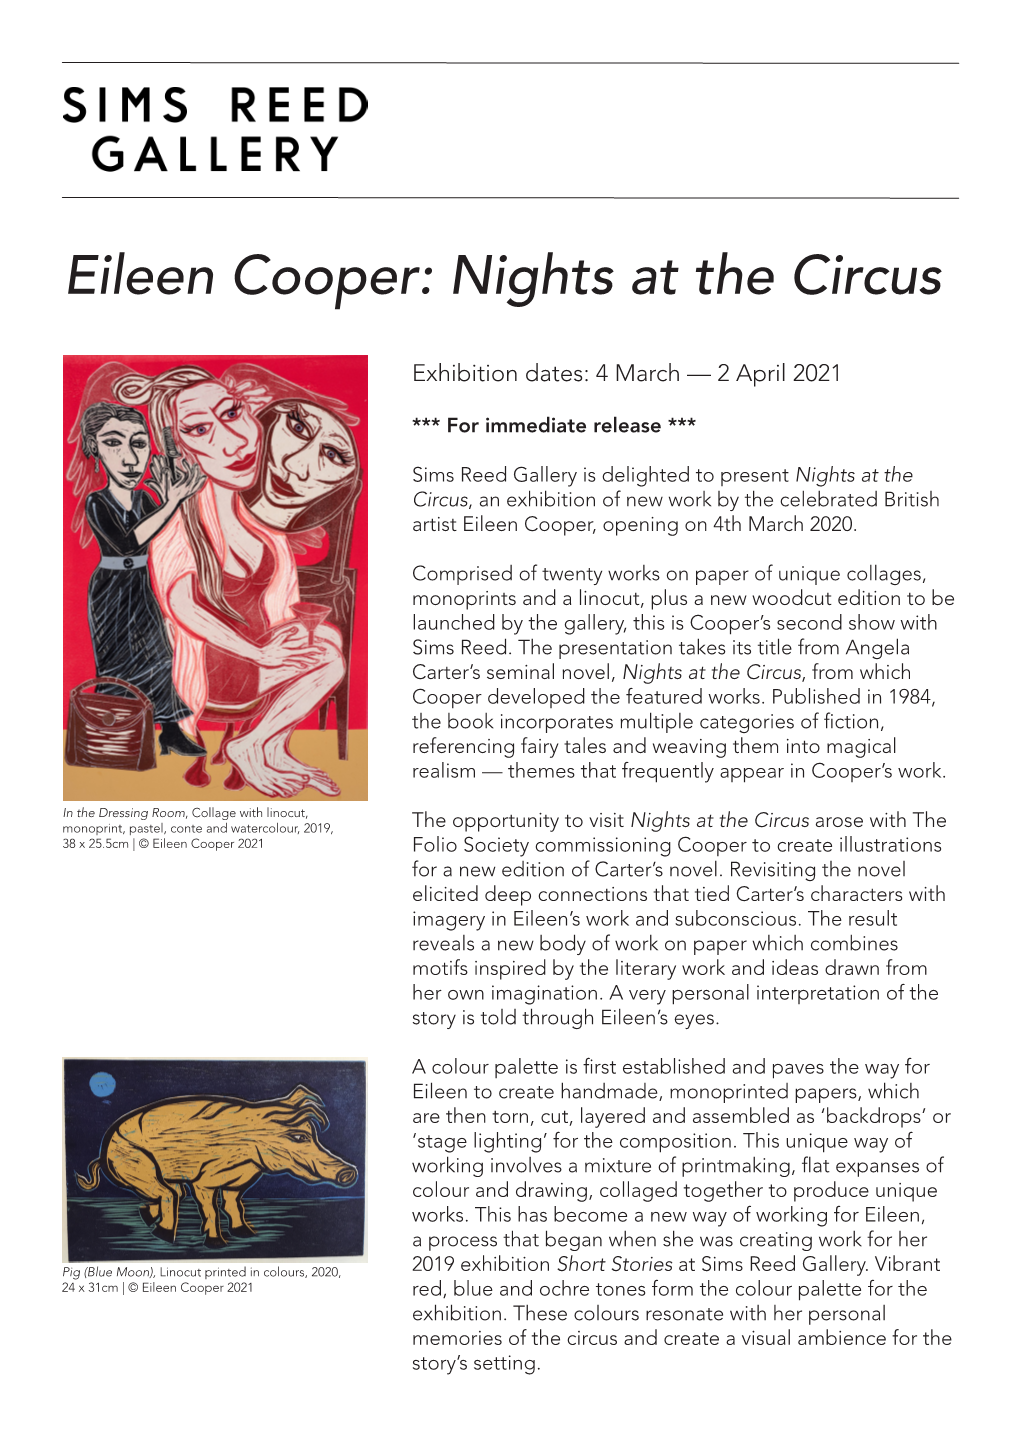 Eileen Cooper: Nights at the Circus